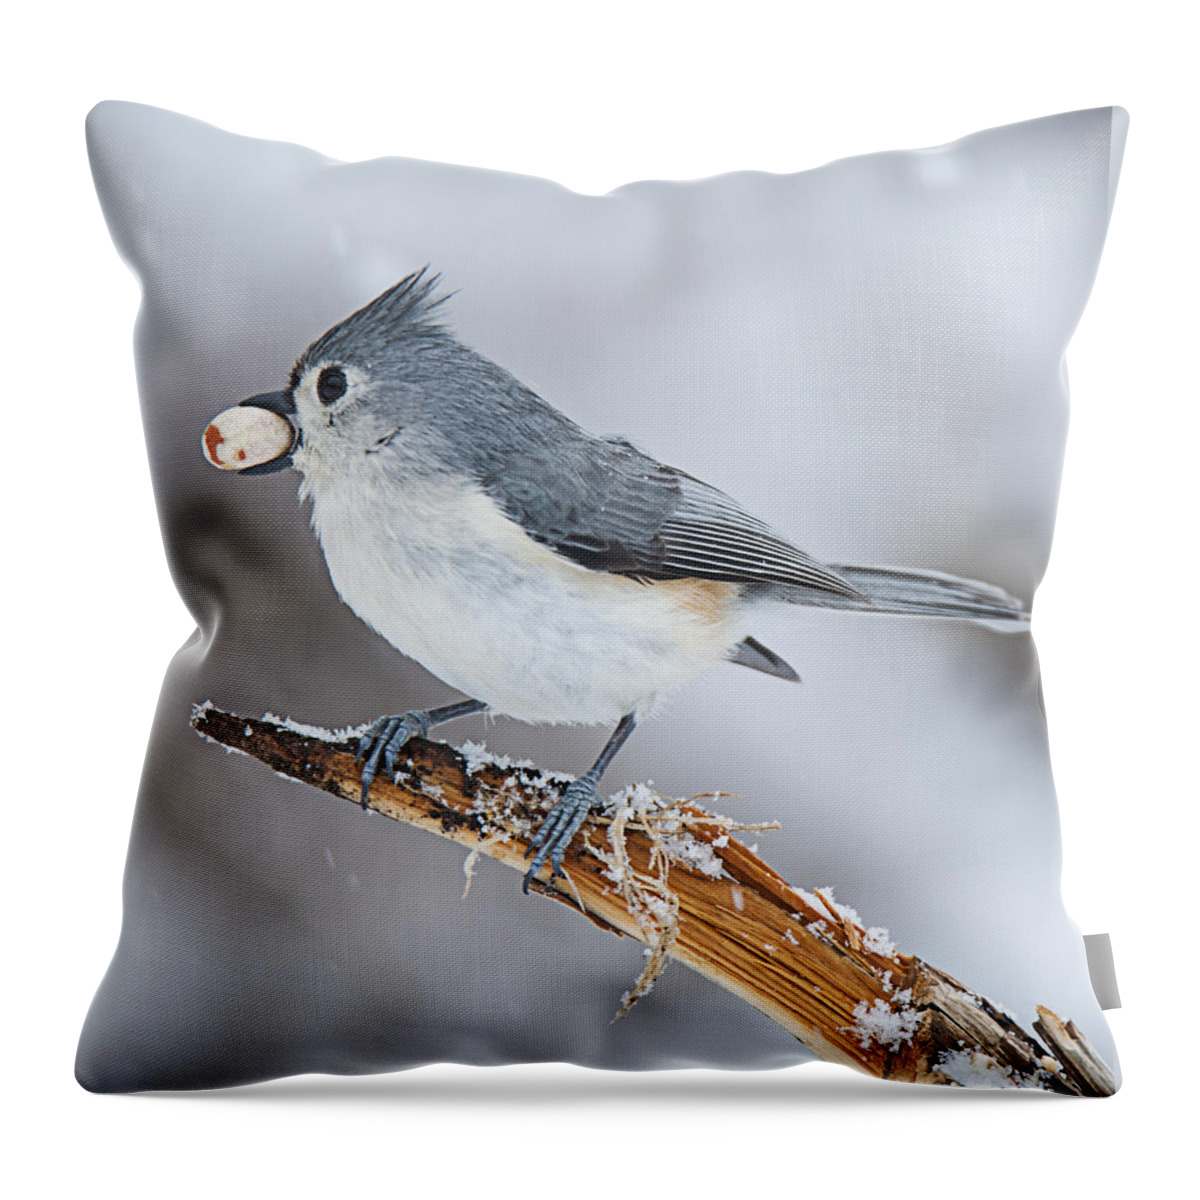 Tufted Titmouse Throw Pillow featuring the photograph Tufted Titmouse by Roni Chastain